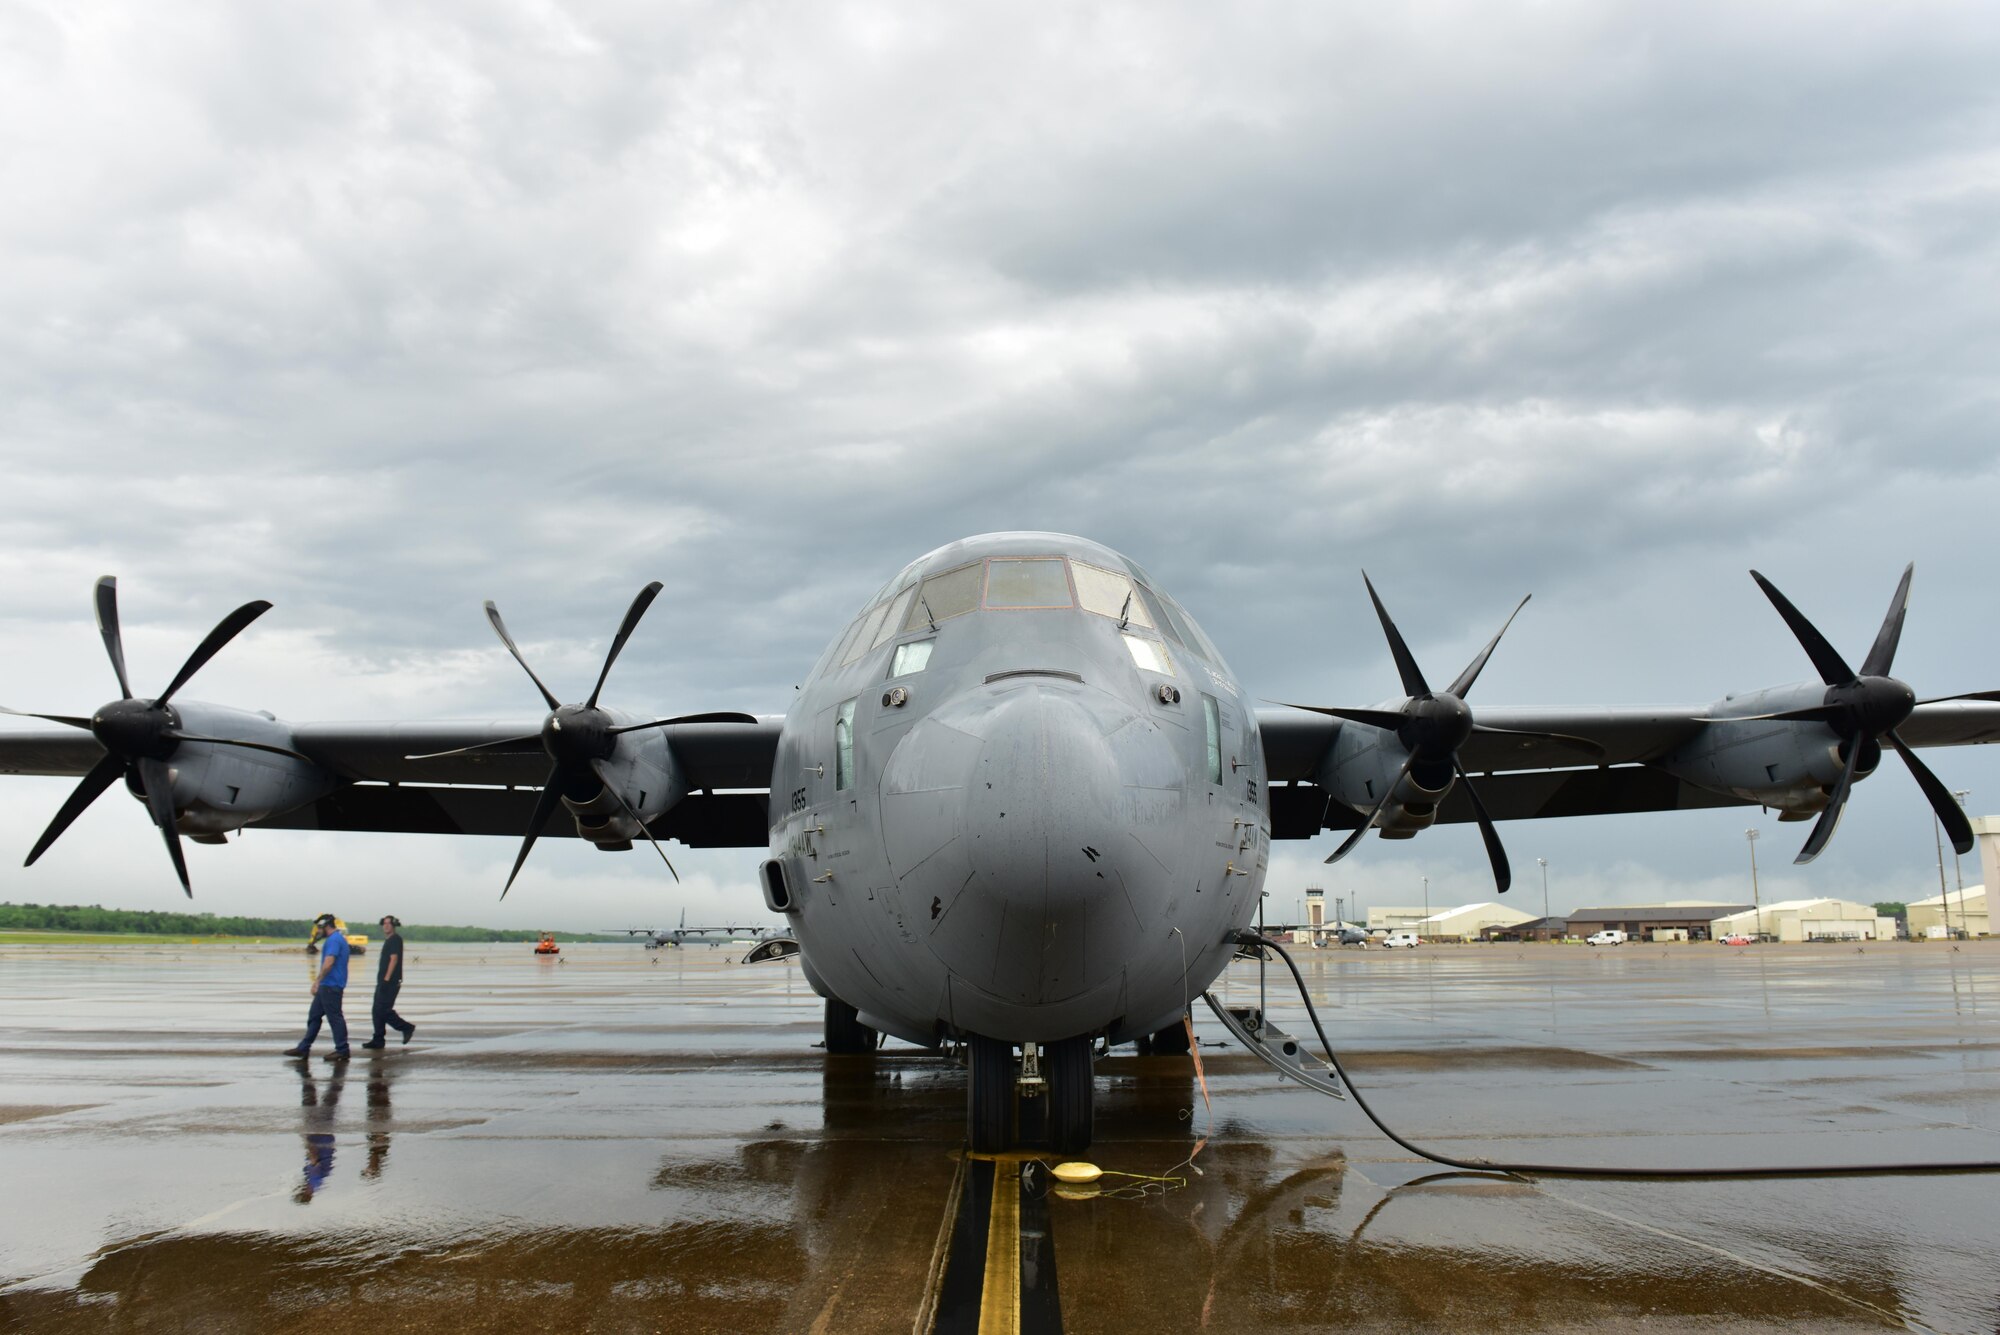 Members of DynCorp International prepare a C-130J for a flight April 17, 2017, at Little Rock Air Force Base, Ark. The 314th Maintenance Group transitioned from enlisted maintainers to DynCorp International contractors to sustain the C-130 training mission. (U.S. Air Force photo by Senior Airman Mercedes Taylor)